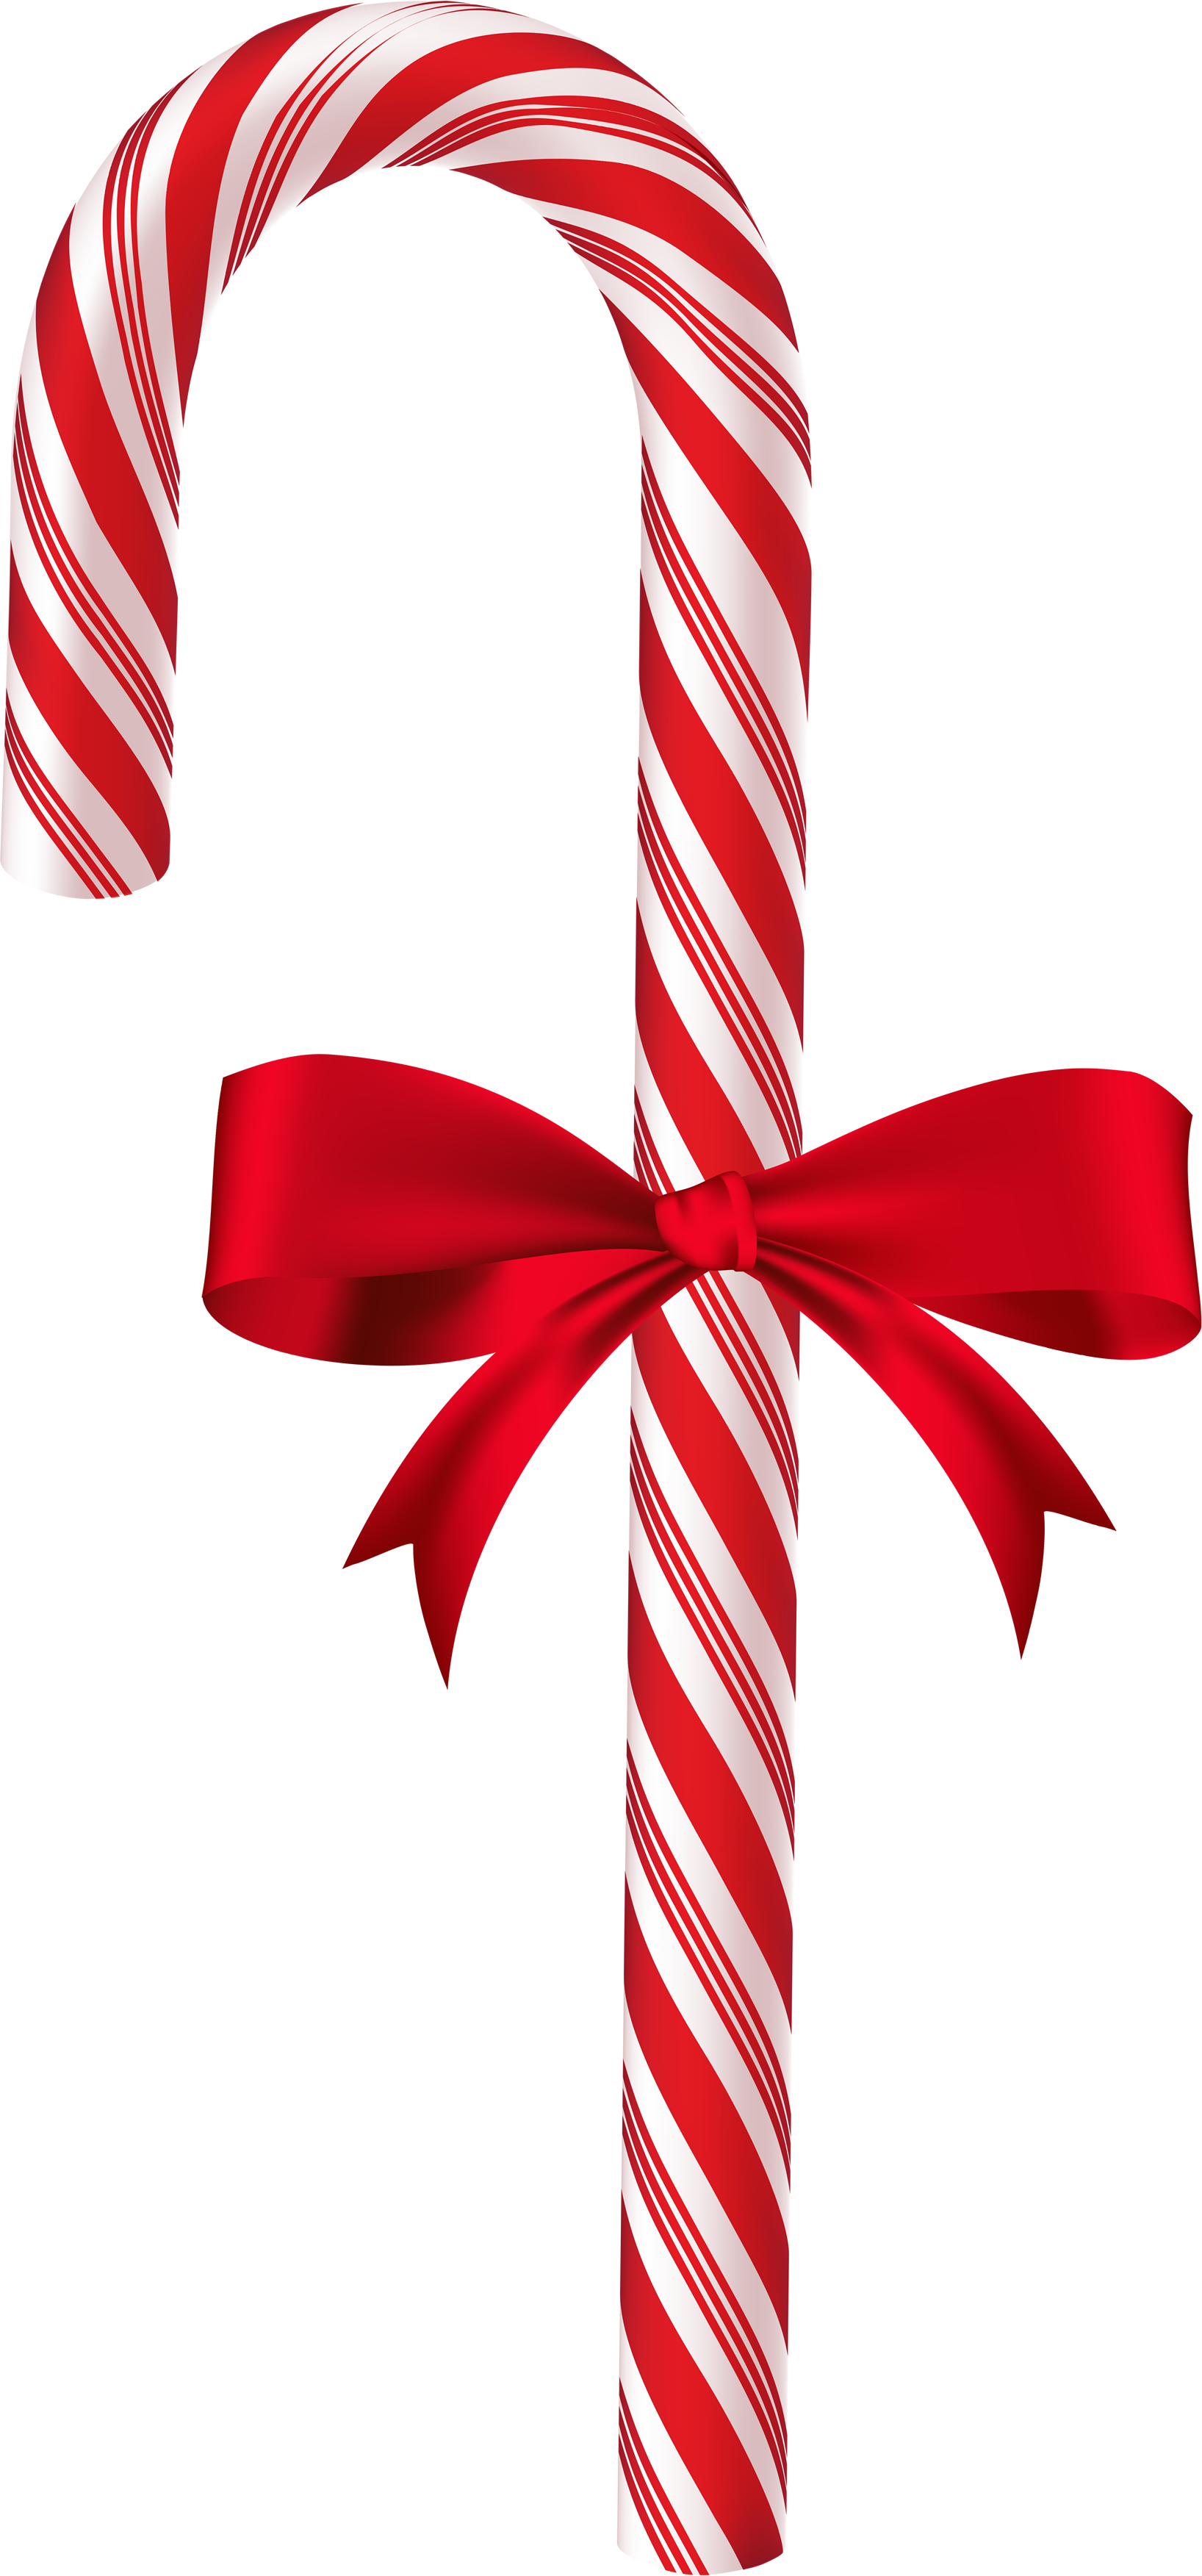 Large Christmas Candy Cane with Bow PNG Image